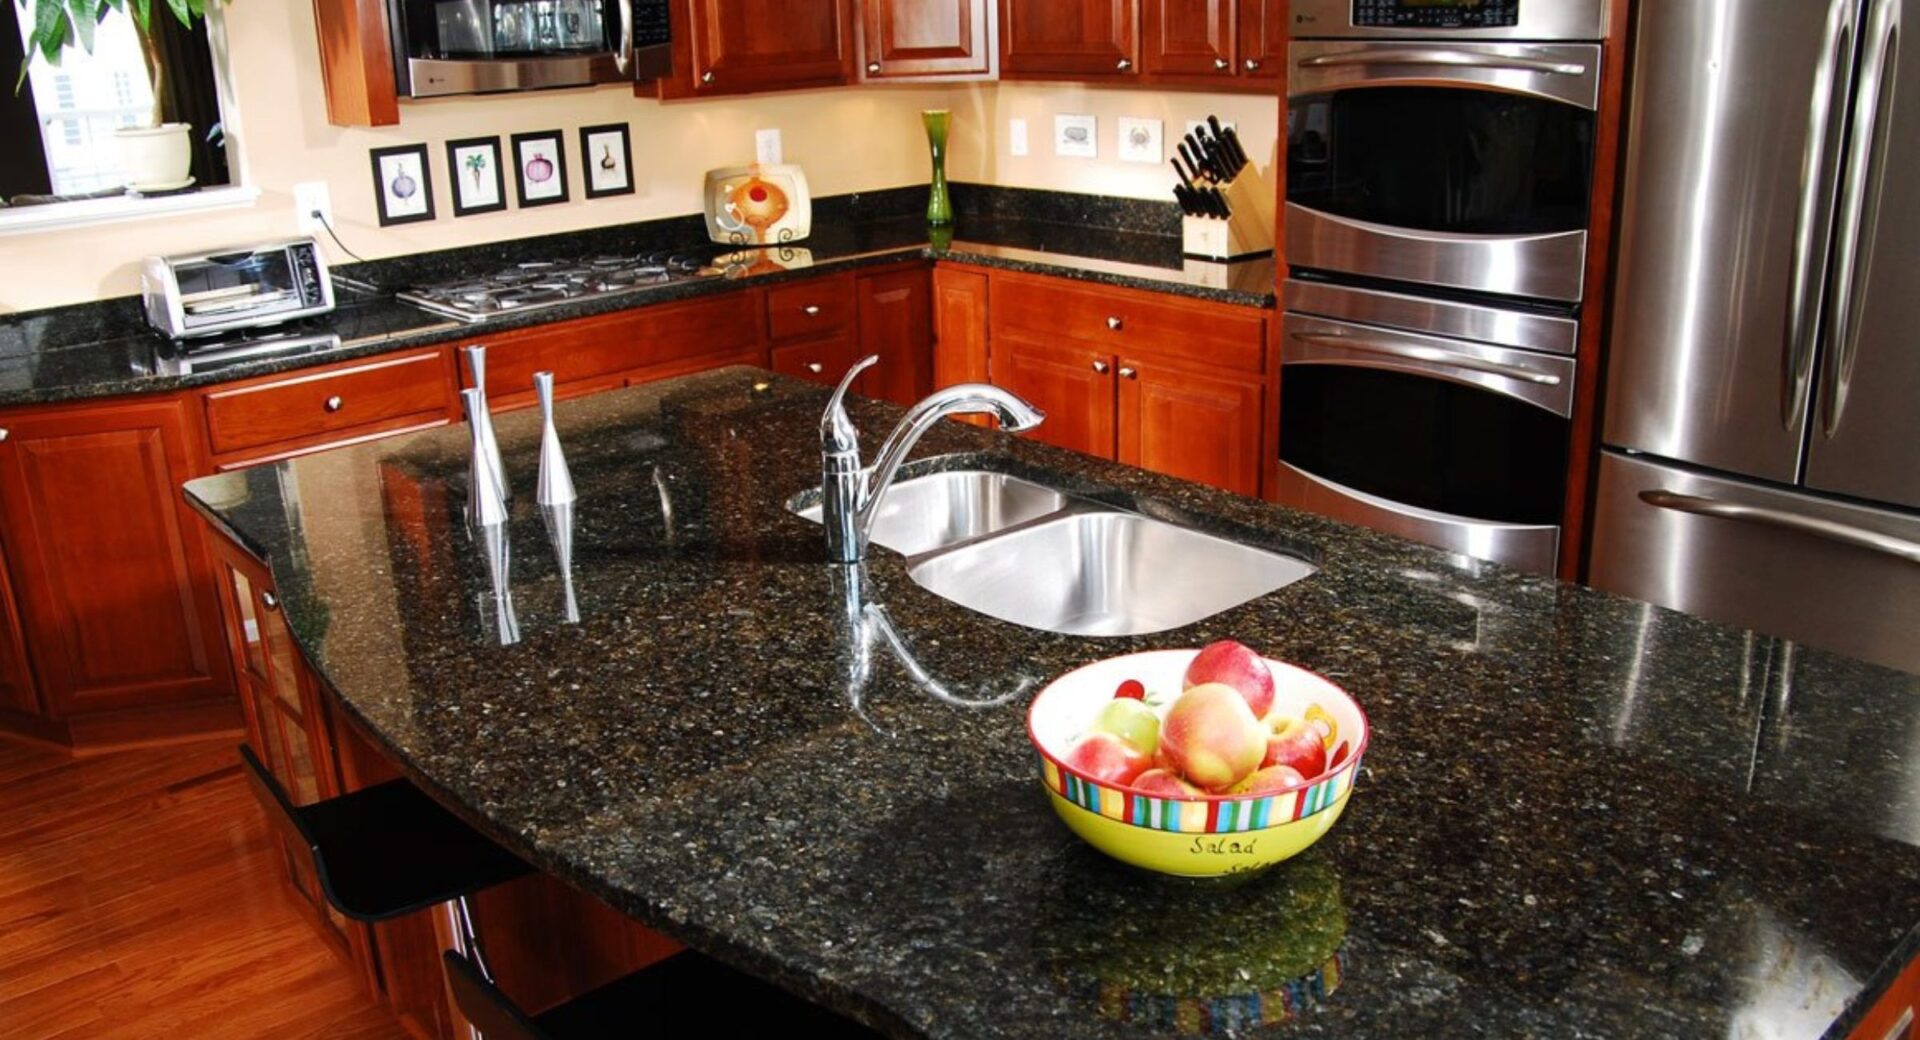 A modern kitchen with stainless steel appliances and a granite countertop, featuring a bowl of fruit on the island.